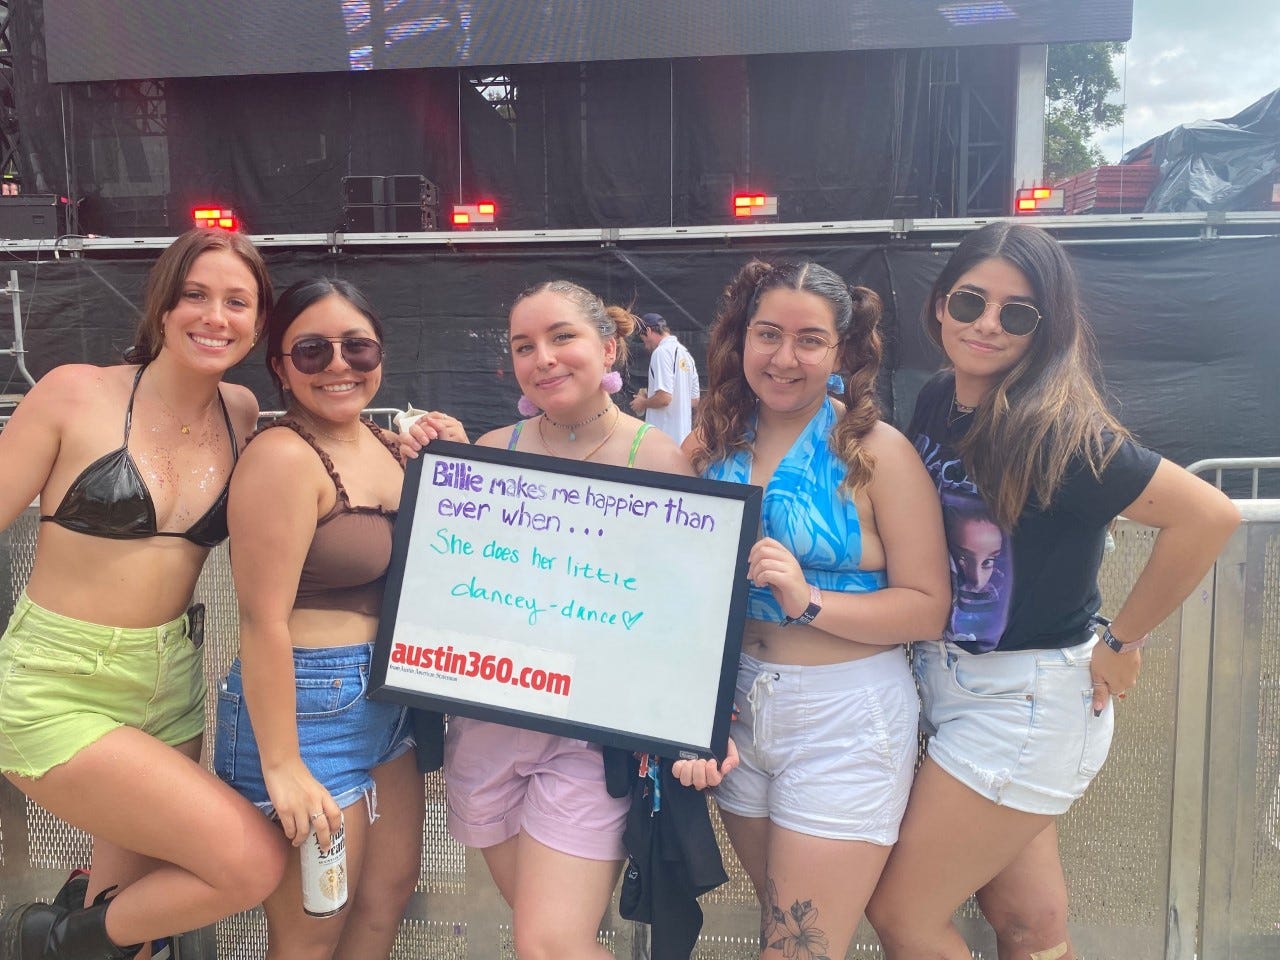 Emily Cook, 16, left, Anahi Claudio, 20, Charity Rodriguez, 21, Jadyn Balderaz, 19, and Elissa Carrasco, 20, waiting for the Billie Eilish show on Saturday Oct. 2, 2021. Cook is from Galveston, Texas. Claudio, Rodriguez, Balderaz and Carrasco are from Edinburg, Texas